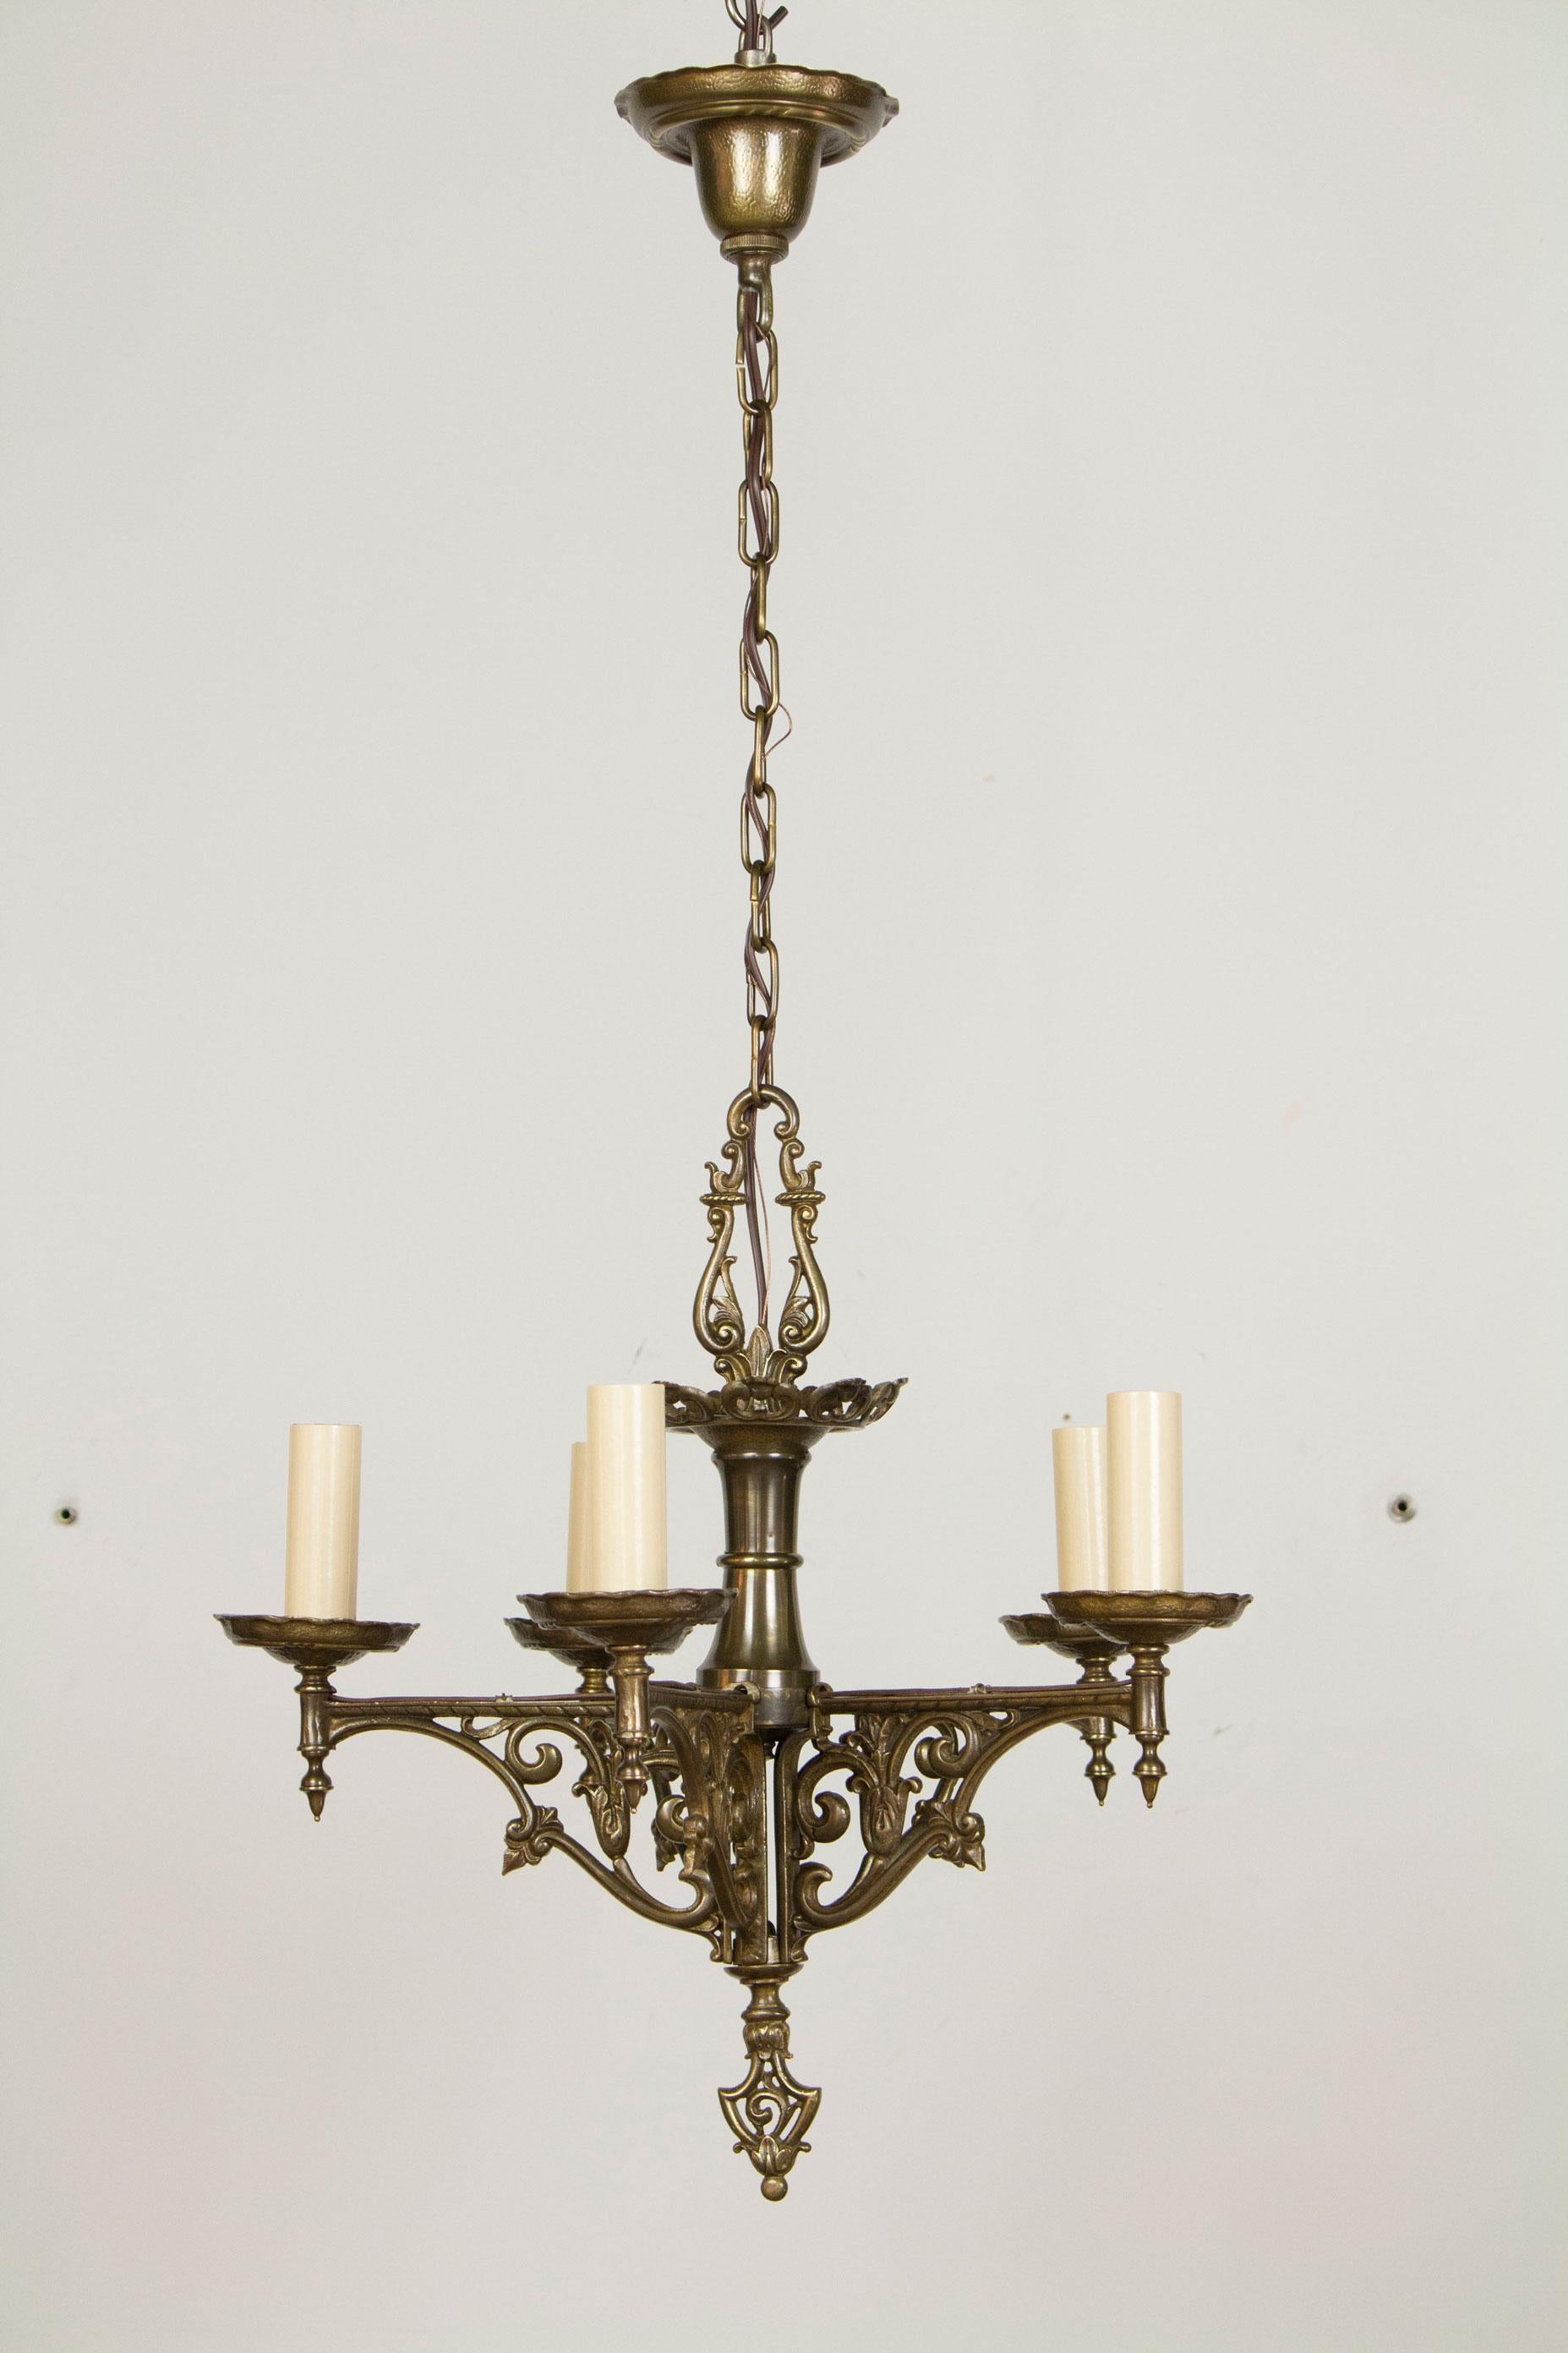 Early 20th Century Five Light Antique Brass Tudor Chandelier For Sale 1